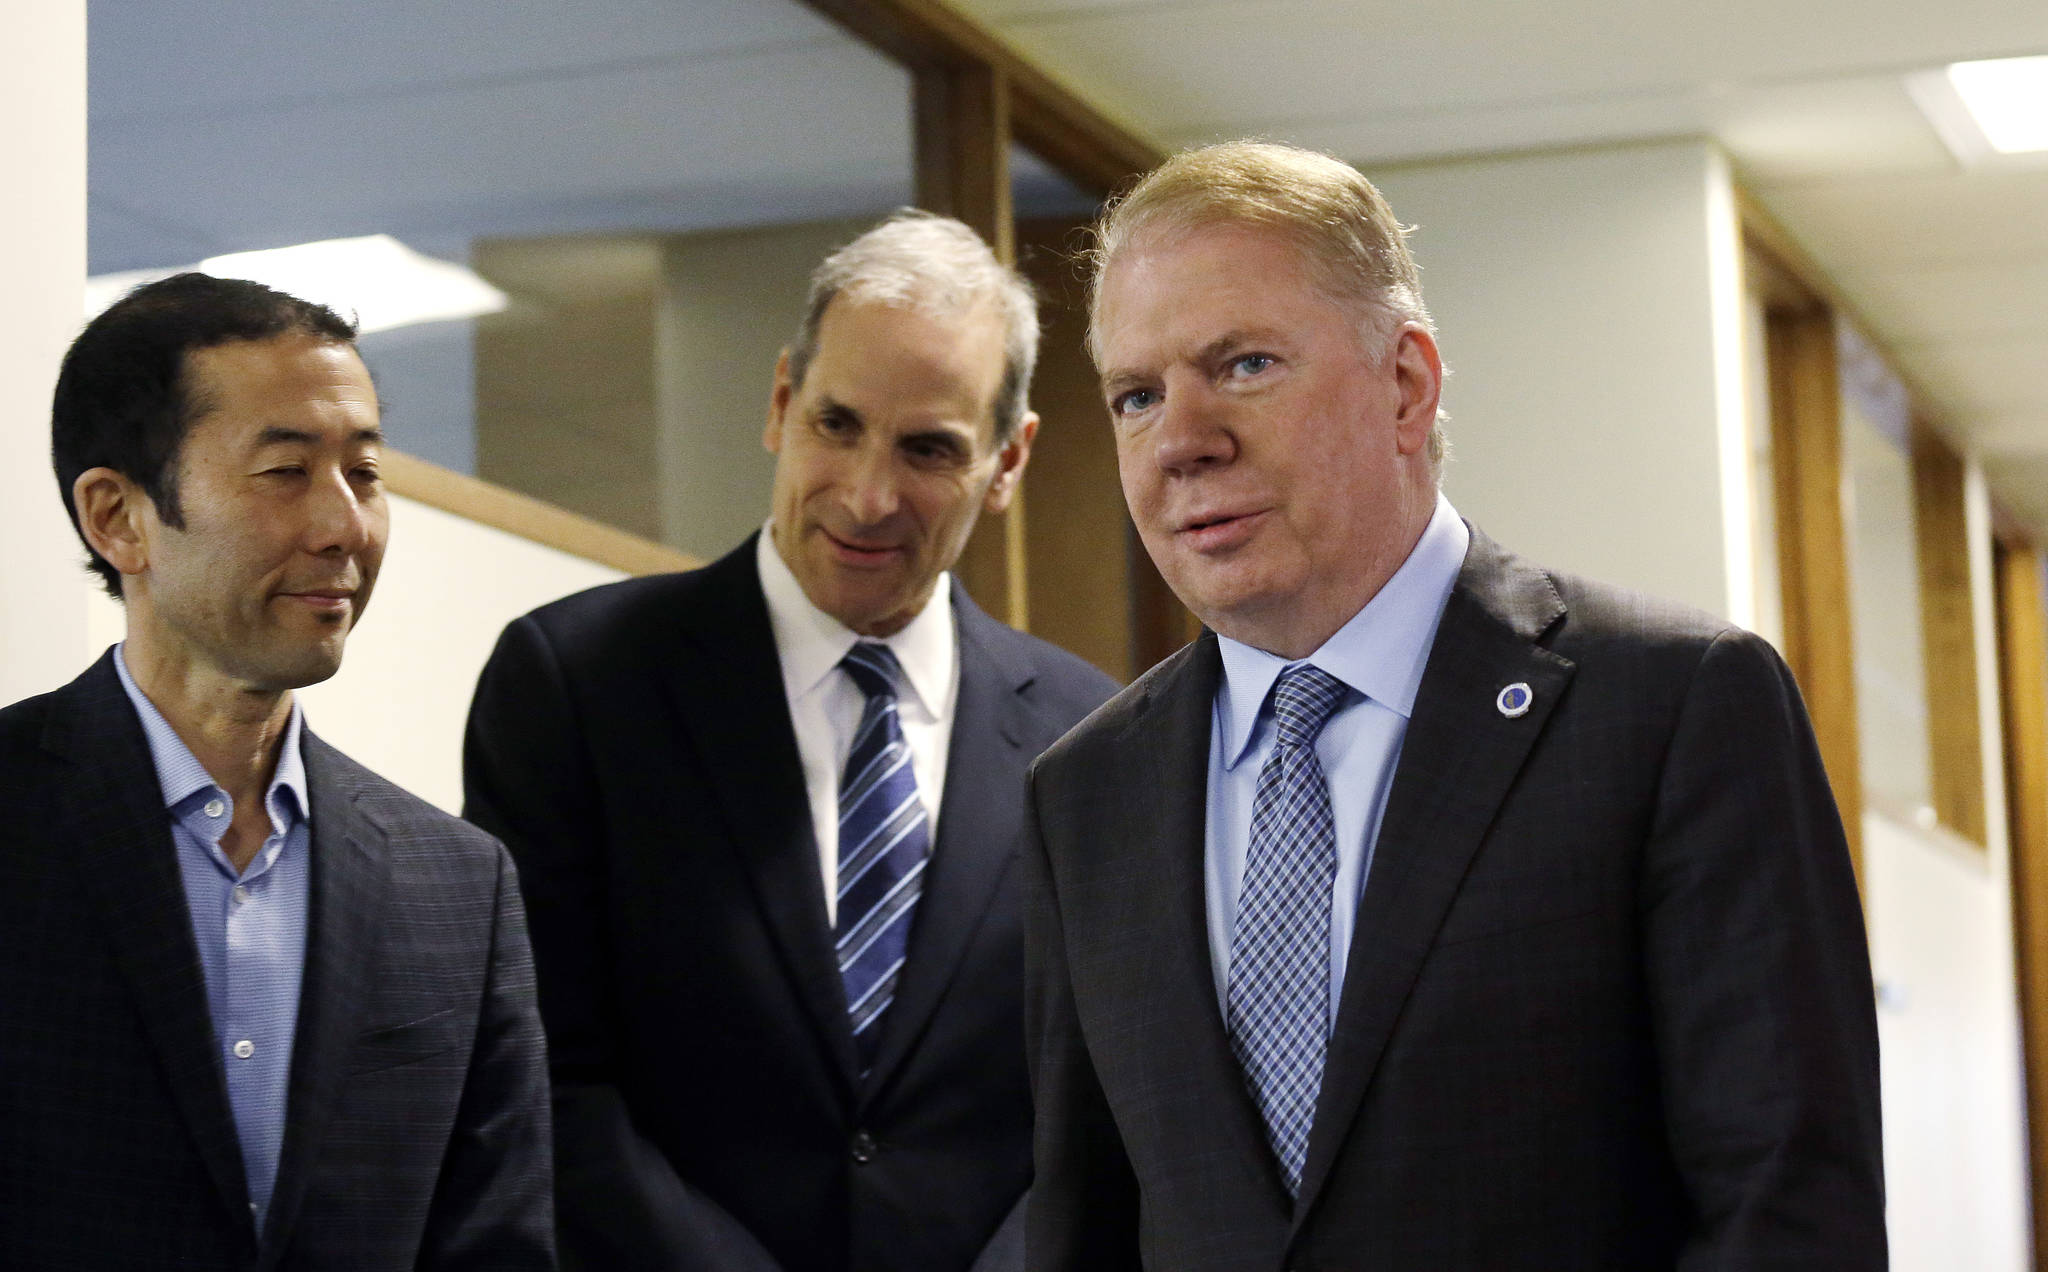 Mayor Murray walks past his husband, Michael Shiosaki, left, and his attorney, Bob Sulkin, before speaking to the media on Friday, April 7, 2017, in Seattle. AP Photo/Elaine Thompson